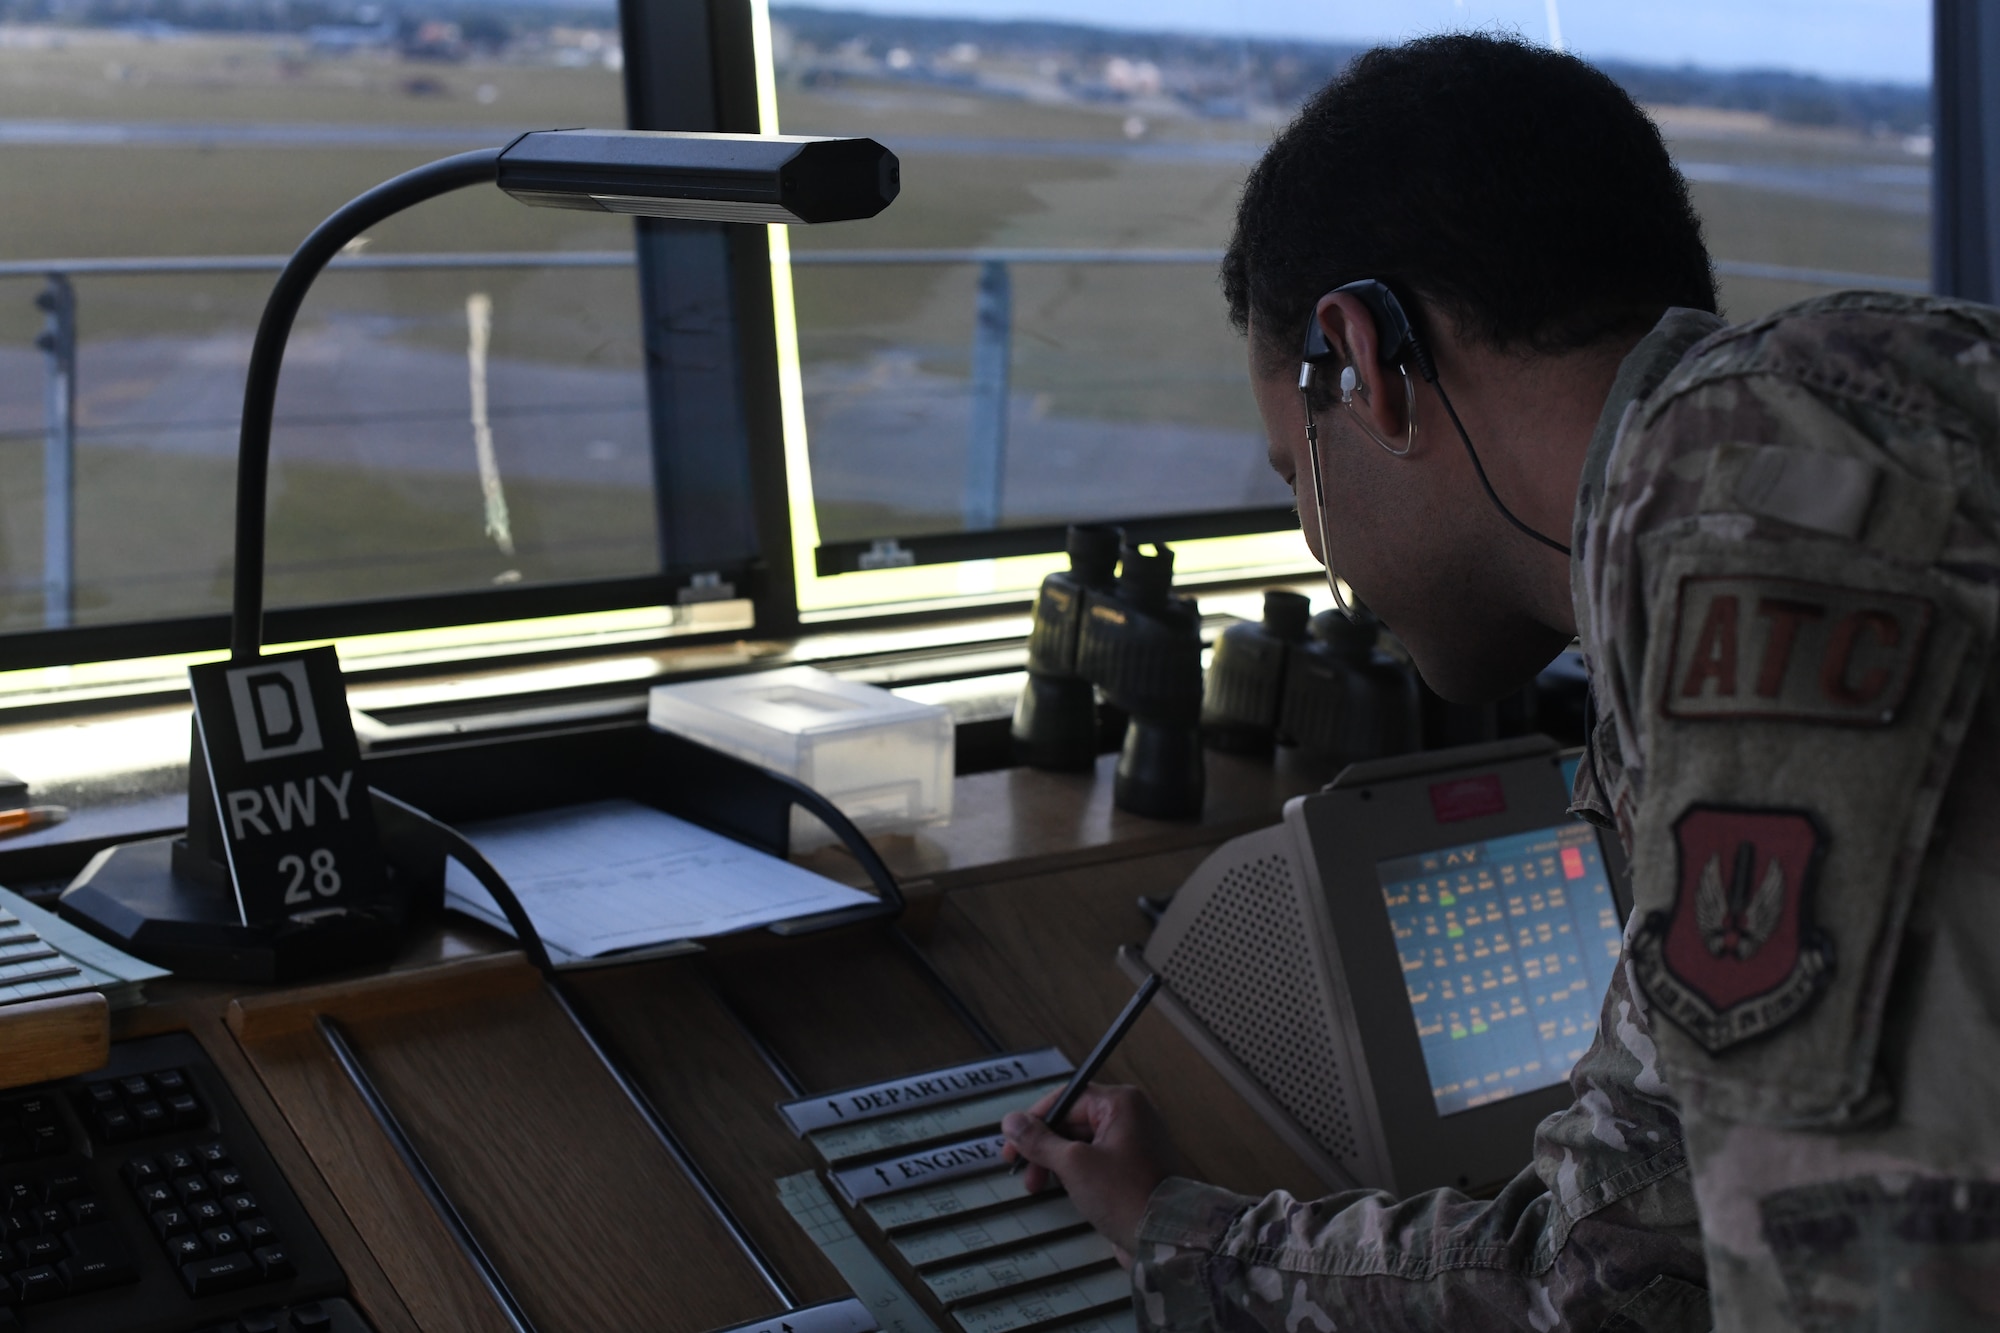 U.S. Senior Airman Malcolm Blair, 100th Operation Support Squadron air traffic controller communicates with an incoming KC-135 Stratotanker aircraft July 28, 2021, at Royal Air Force Mildenhall, England. Controllers communicate with aircrews using a two-way radio system. (U.S. Air Force photo by Senior Airman Antonia Herrera)